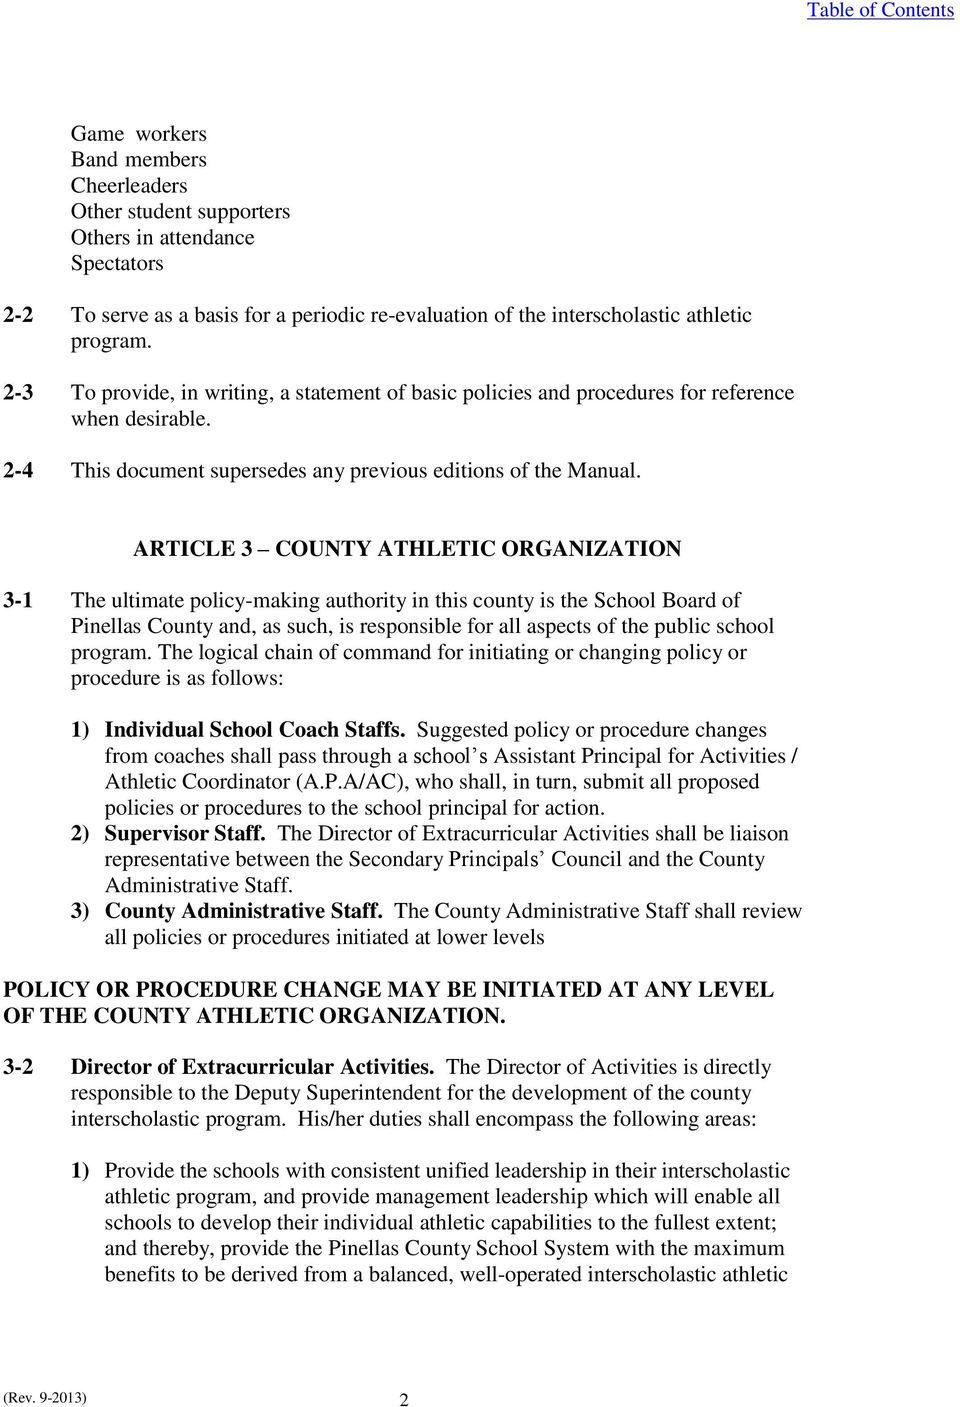 ARTICLE 3 COUNTY ATHLETIC ORGANIZATION 3-1 The ultimate policy-making authority in this county is the School Board of Pinellas County and, as such, is responsible for all aspects of the public school